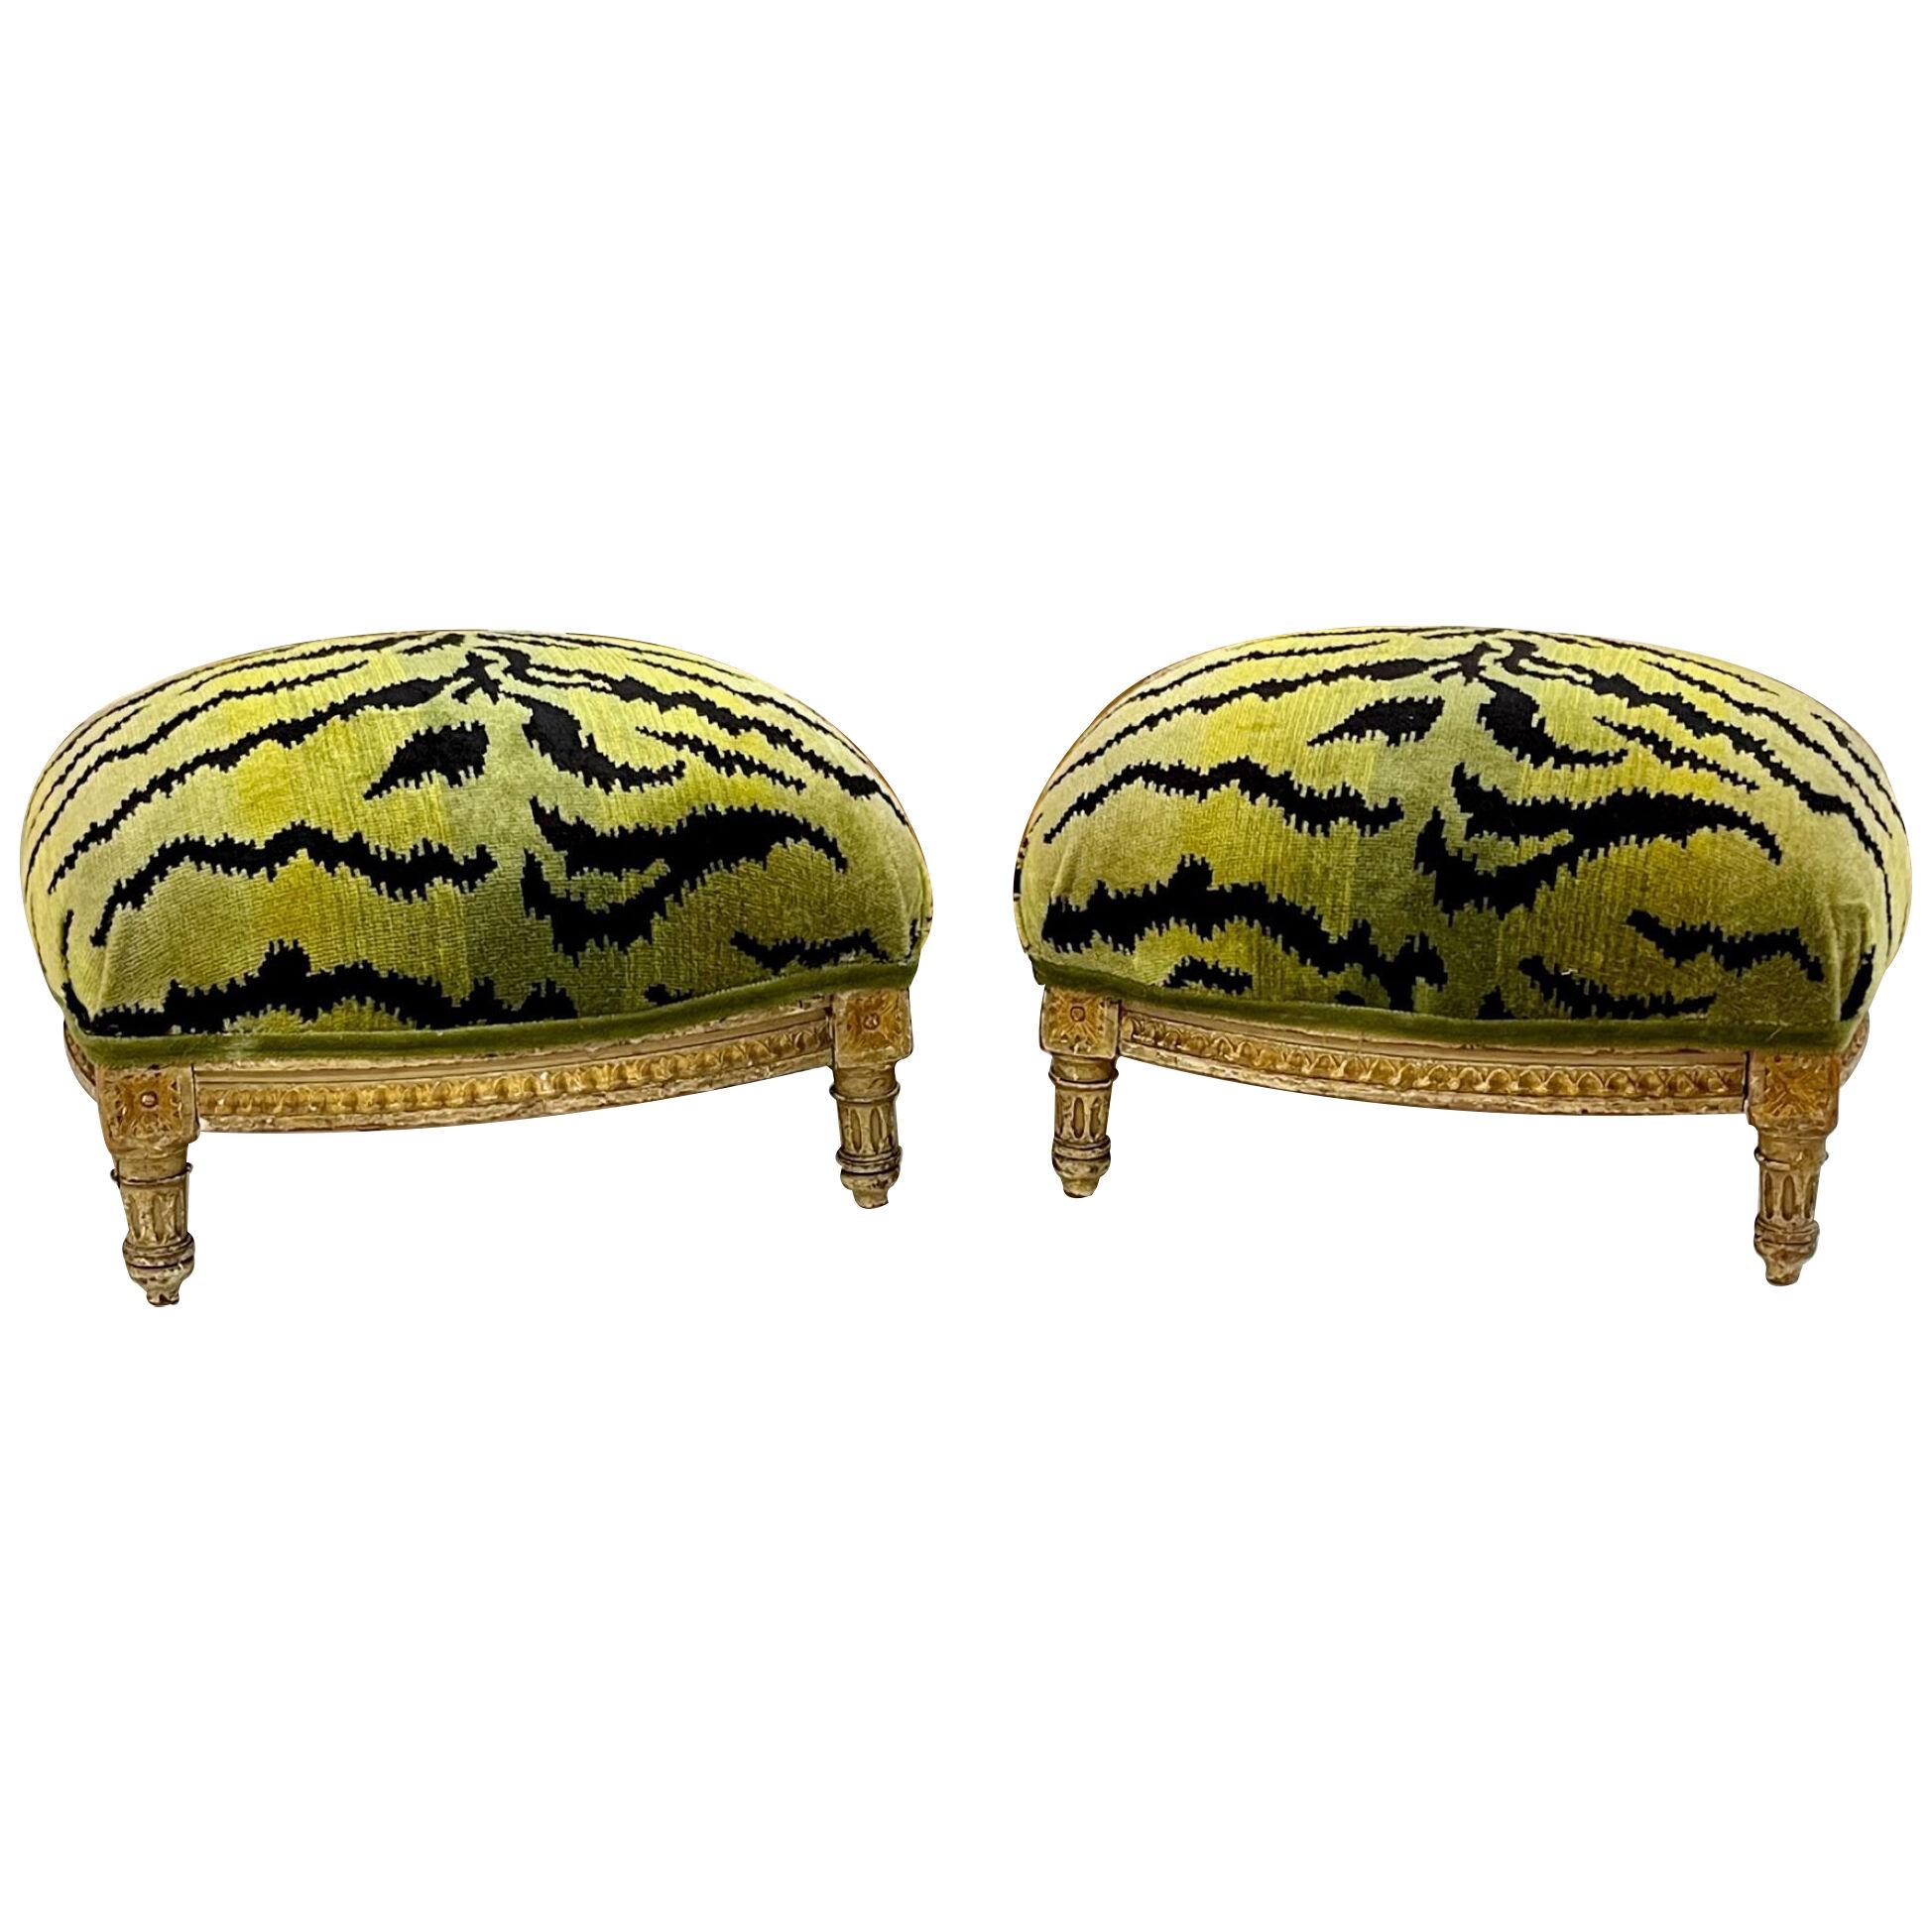 19th Century Pair of French Louis XVI Giltwood Stools